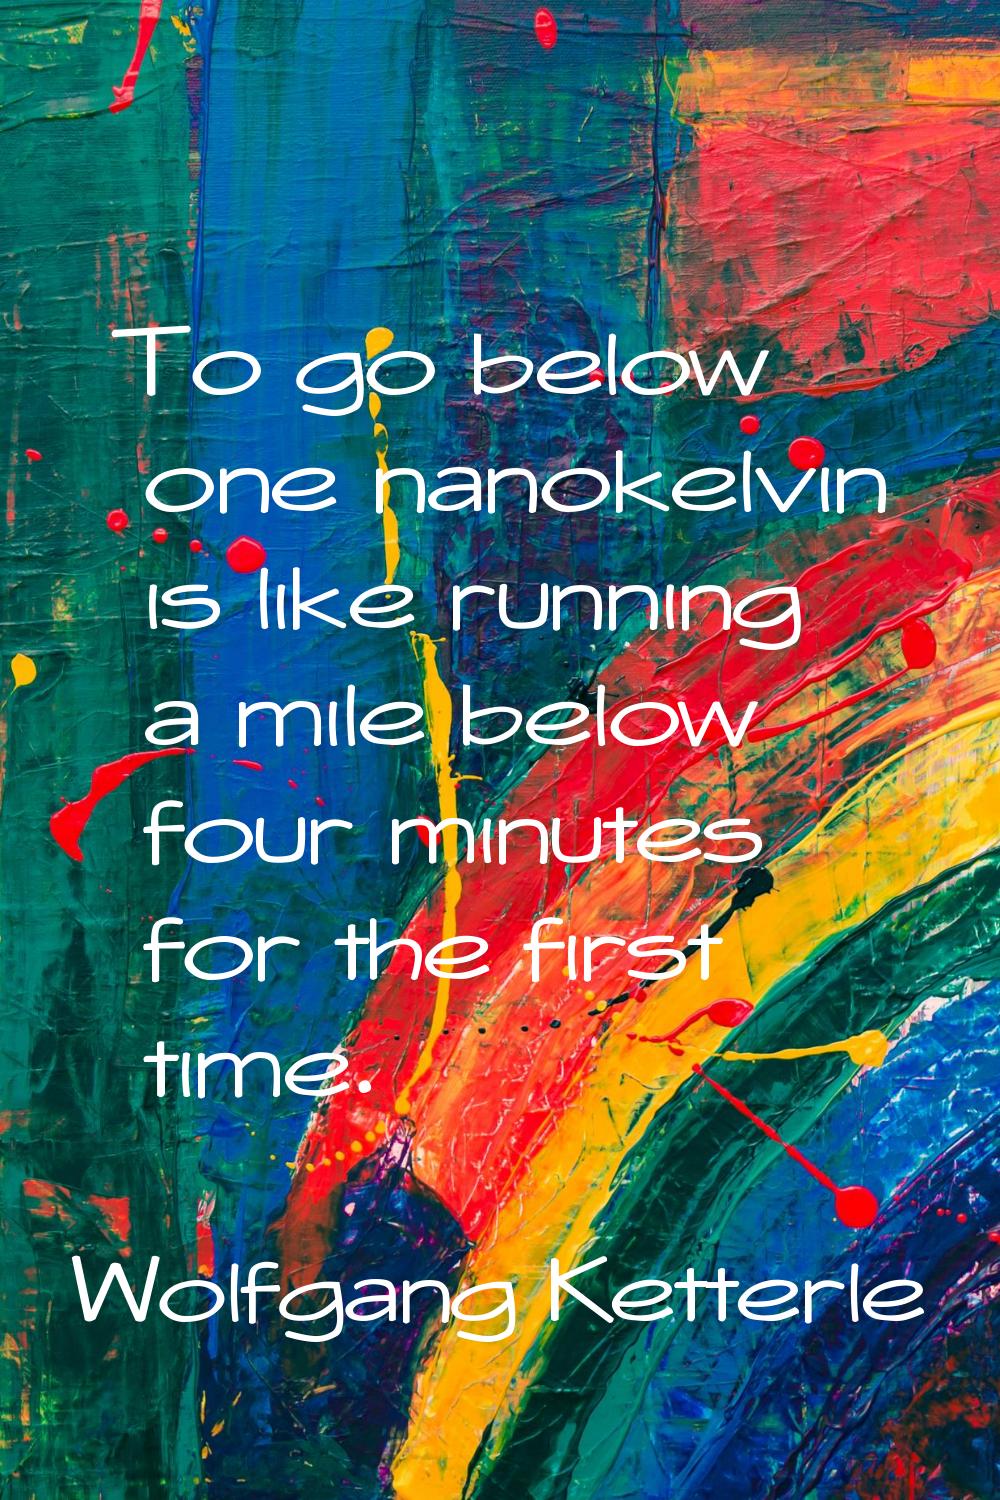 To go below one nanokelvin is like running a mile below four minutes for the first time.